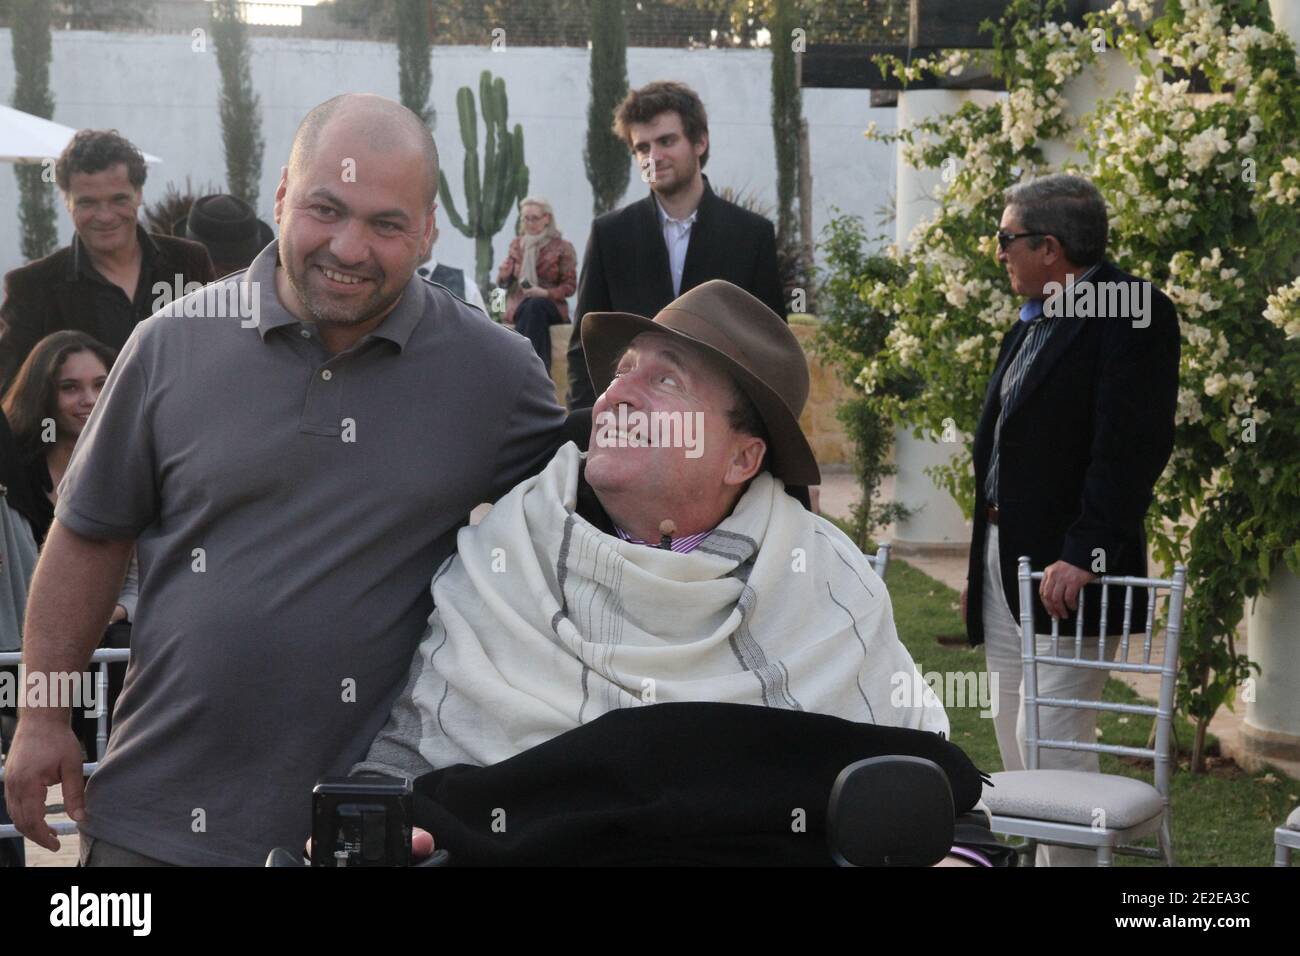 EXCLUSIVE - Philippe Pozzo di Borgo, who became quadriplegic after a paragliding accident in 1993, poses with his former auxiliary Abdel Seliou in Marakkech, Morocco, November 13, 2011. His story inspired the movie 'Intouchables' directed by Olivier Nakache and Eric Toledano, released in France on November 2011, in which the actor Francois Cluzet plays his role and actor Omar Sy plays Abdel Seliou's role. In France, the movie reached 10 million of filmgoers. Photo by William Stevens/ABACAPRESS.COM Stock Photo